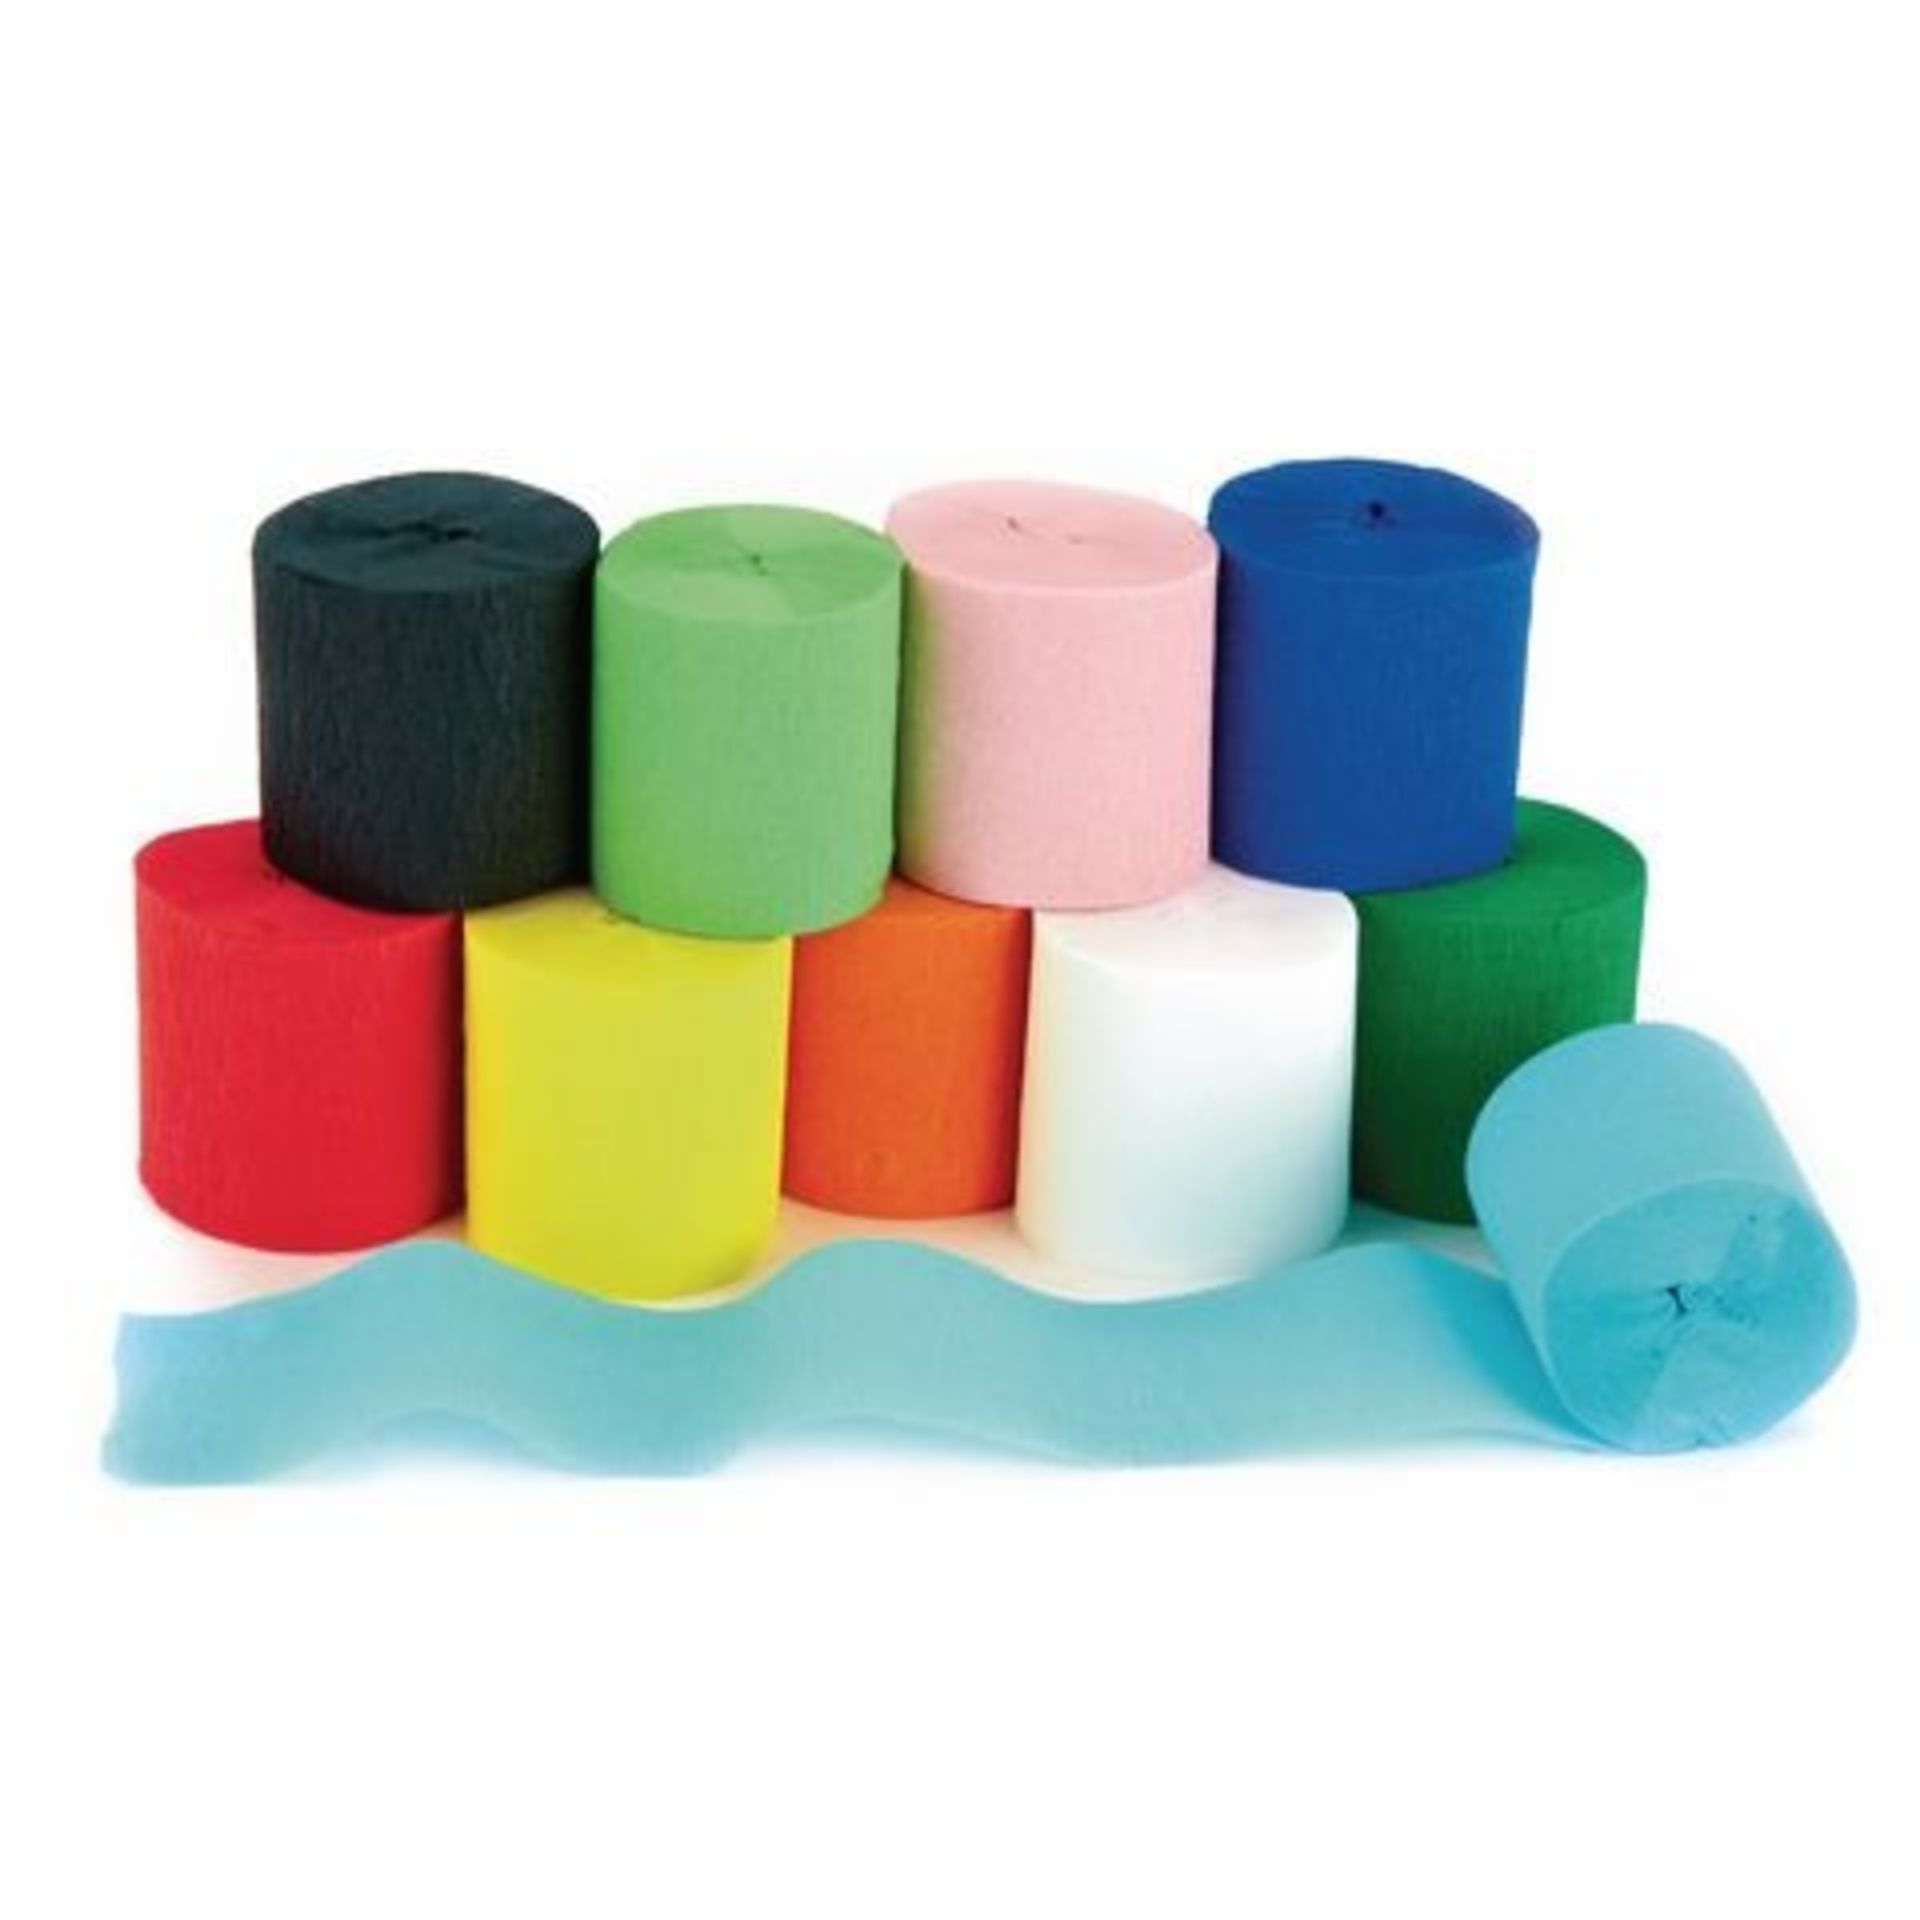 + VAT Grade A A Lot Of Three Packs Of 10 Rolls Crepe Streamers (Image Is Similar To Item)